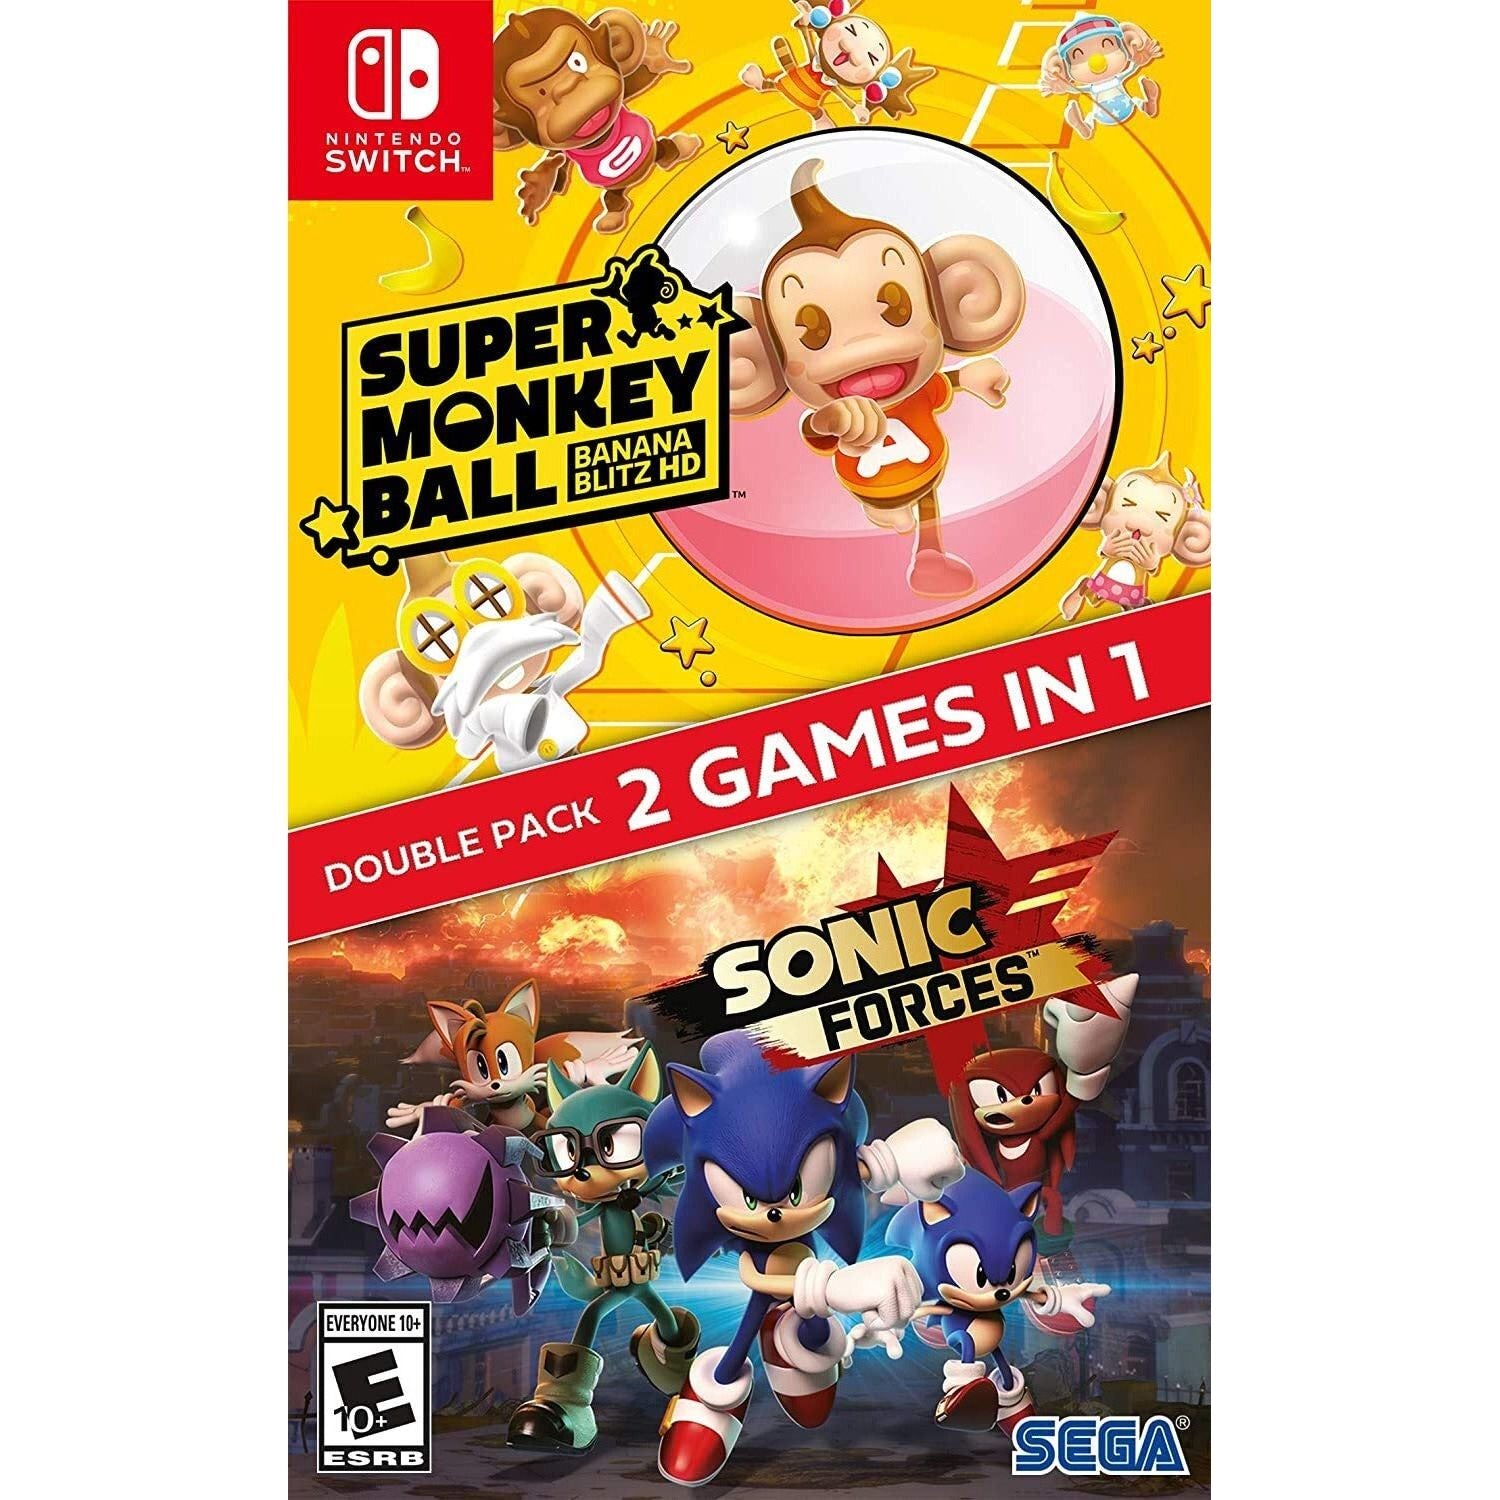 Switch - Sonic Forces / Super Monkey Ball: Banana Blitz HD Double Pack (In Case)